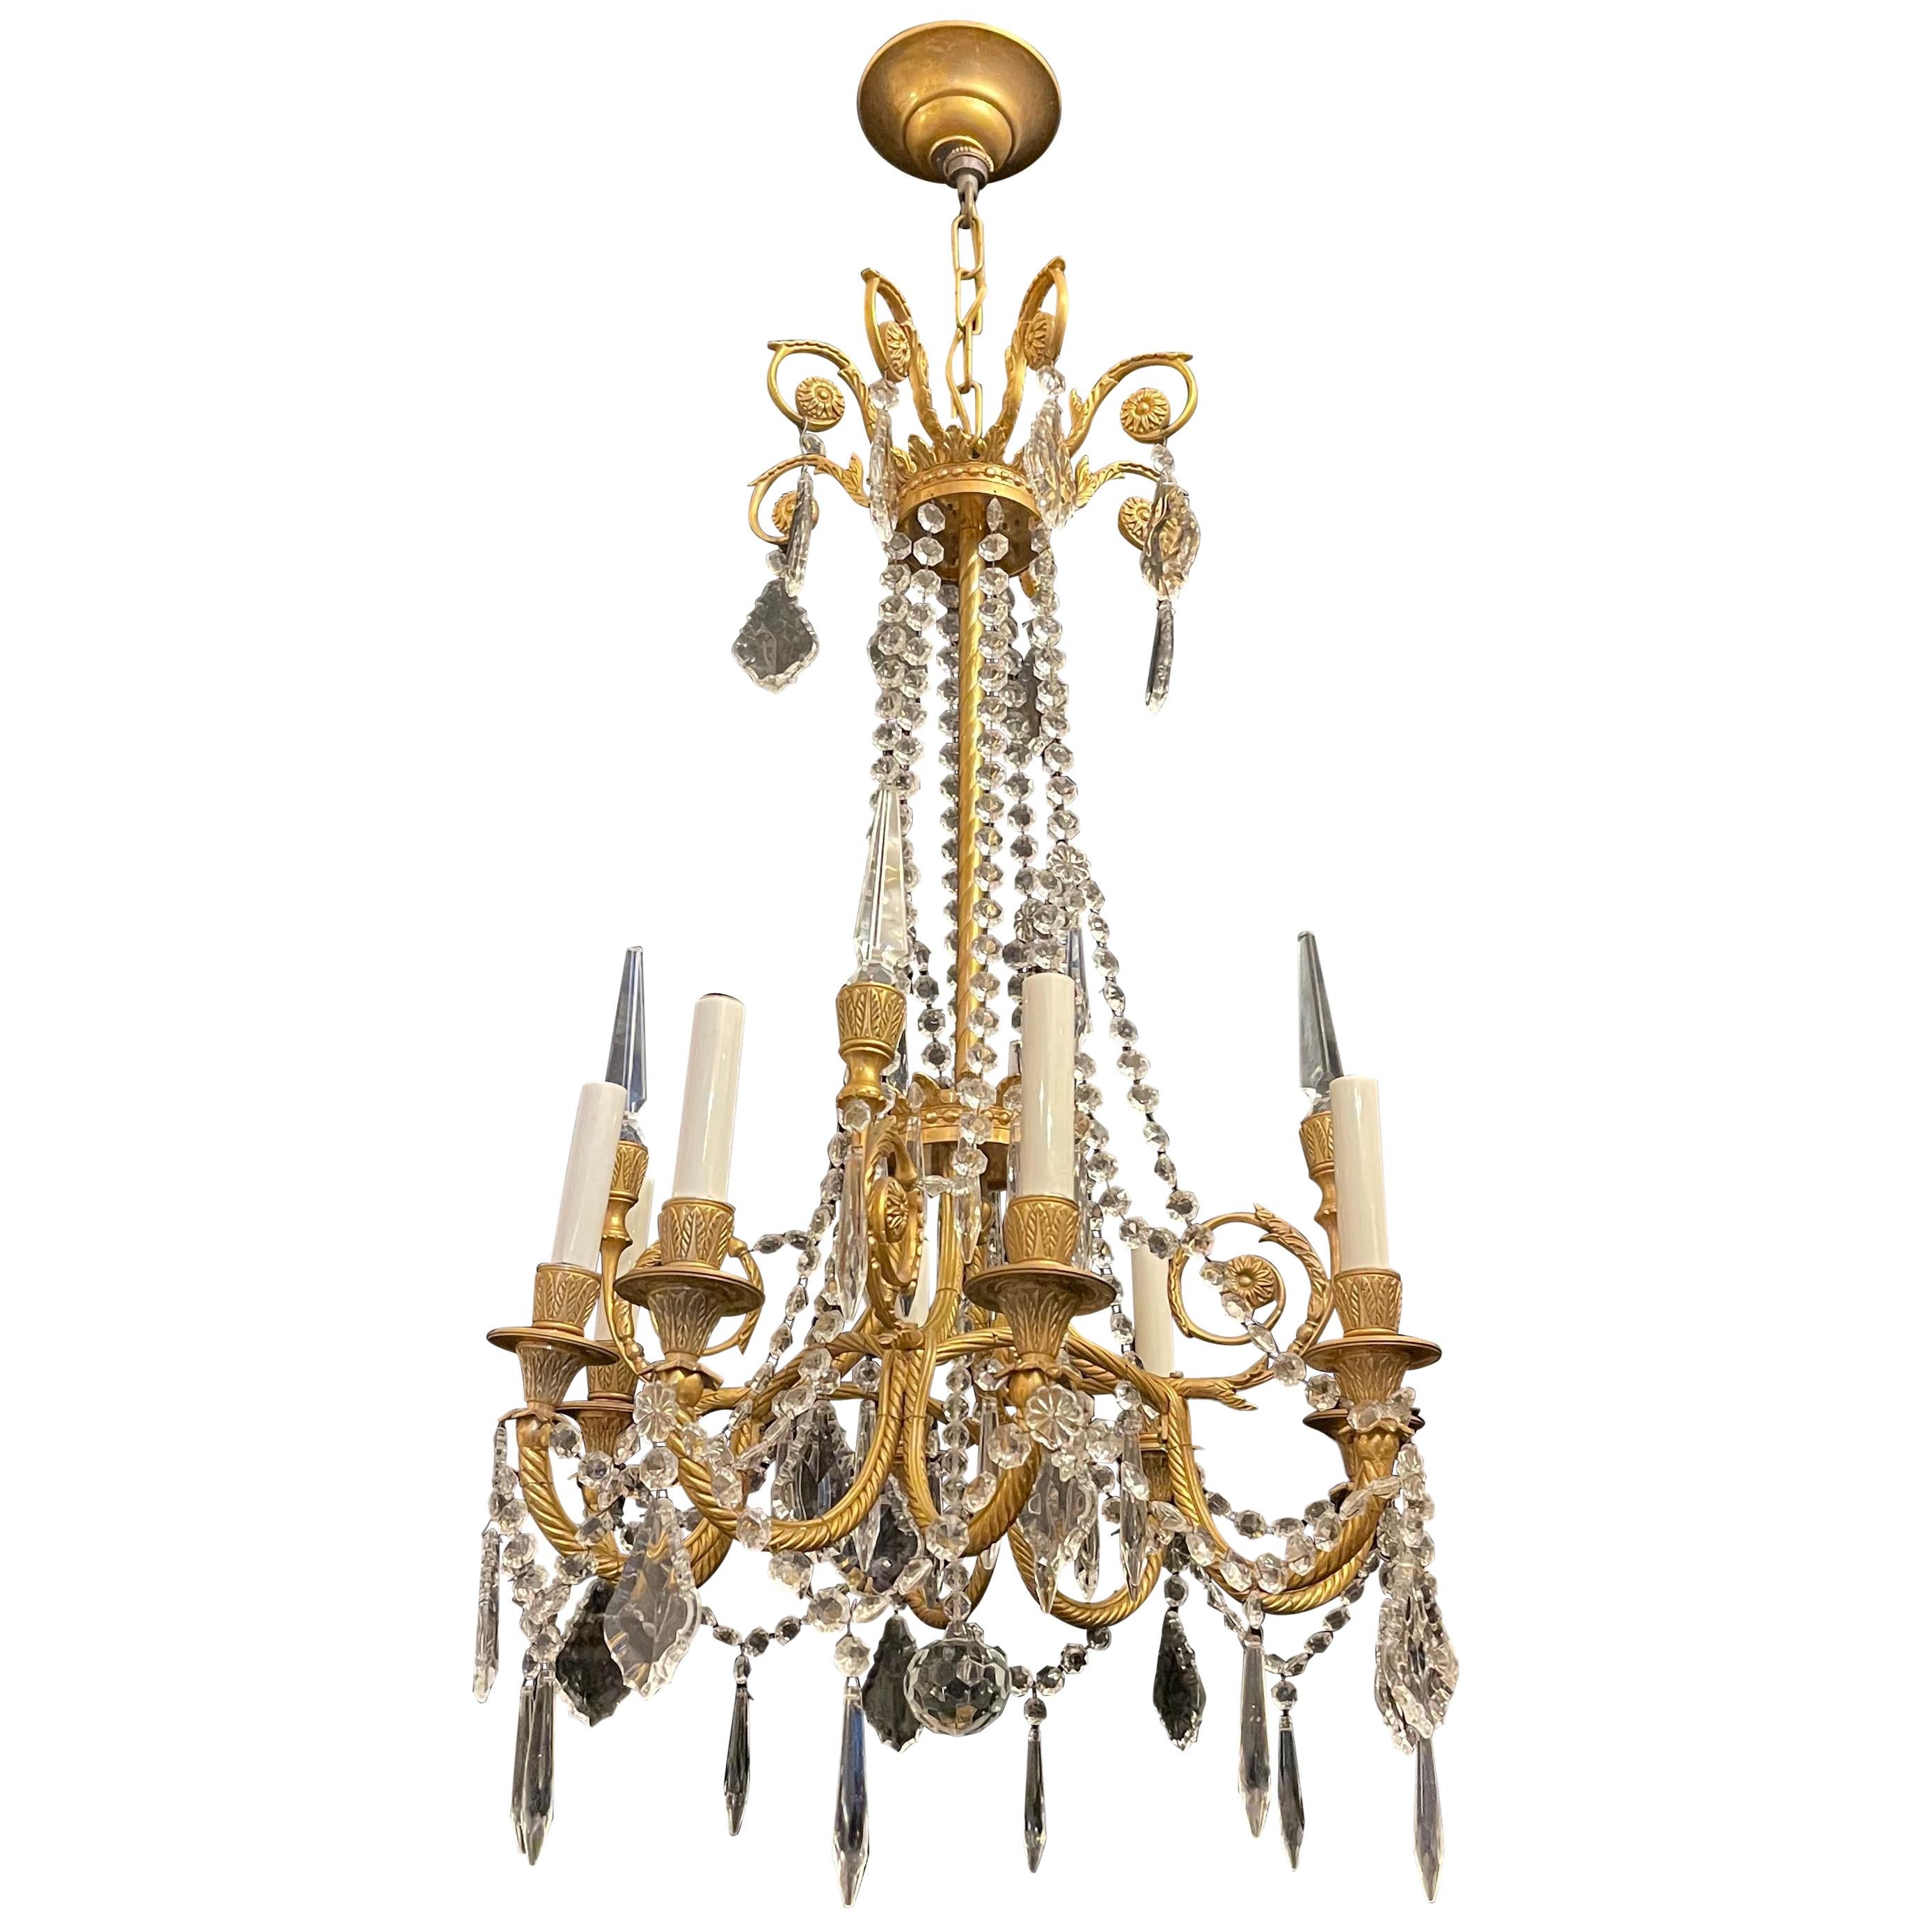 Wonderful French Neoclassical Dore Bronze and Crystal 8-Light Chandelier